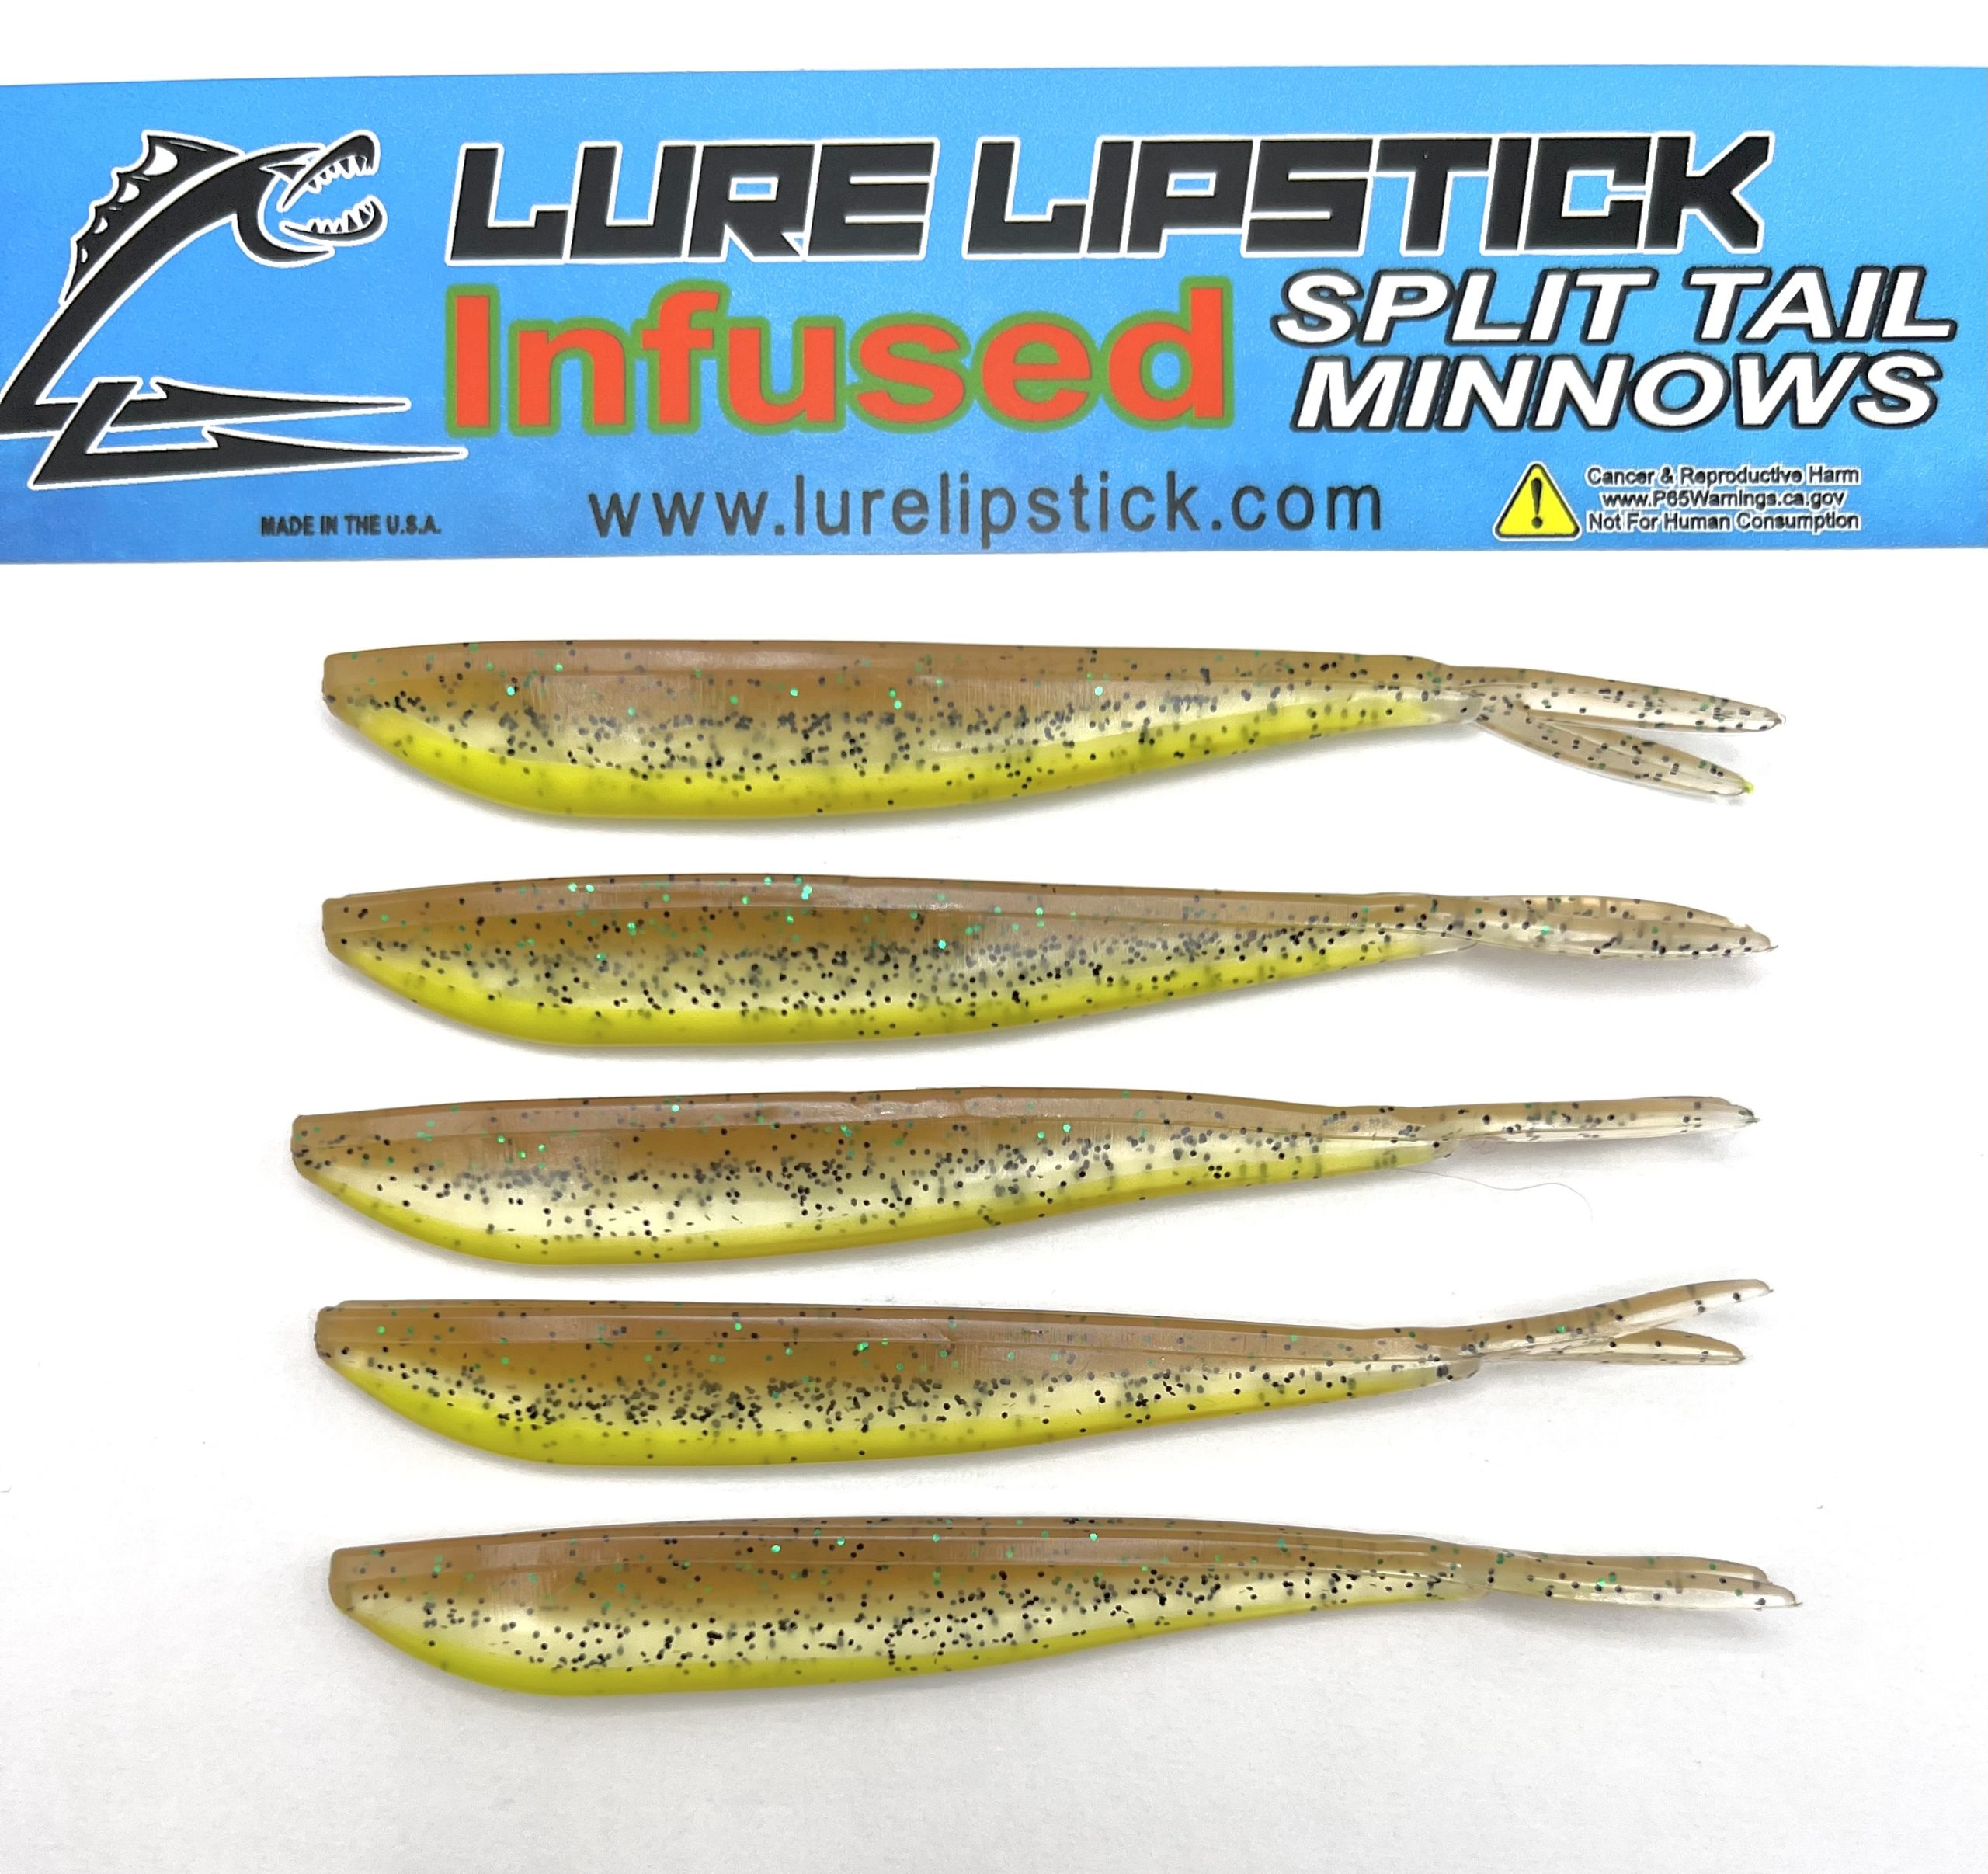 4in 5 Pack Custom Split Tail Minnows - Goby Yellow Belly